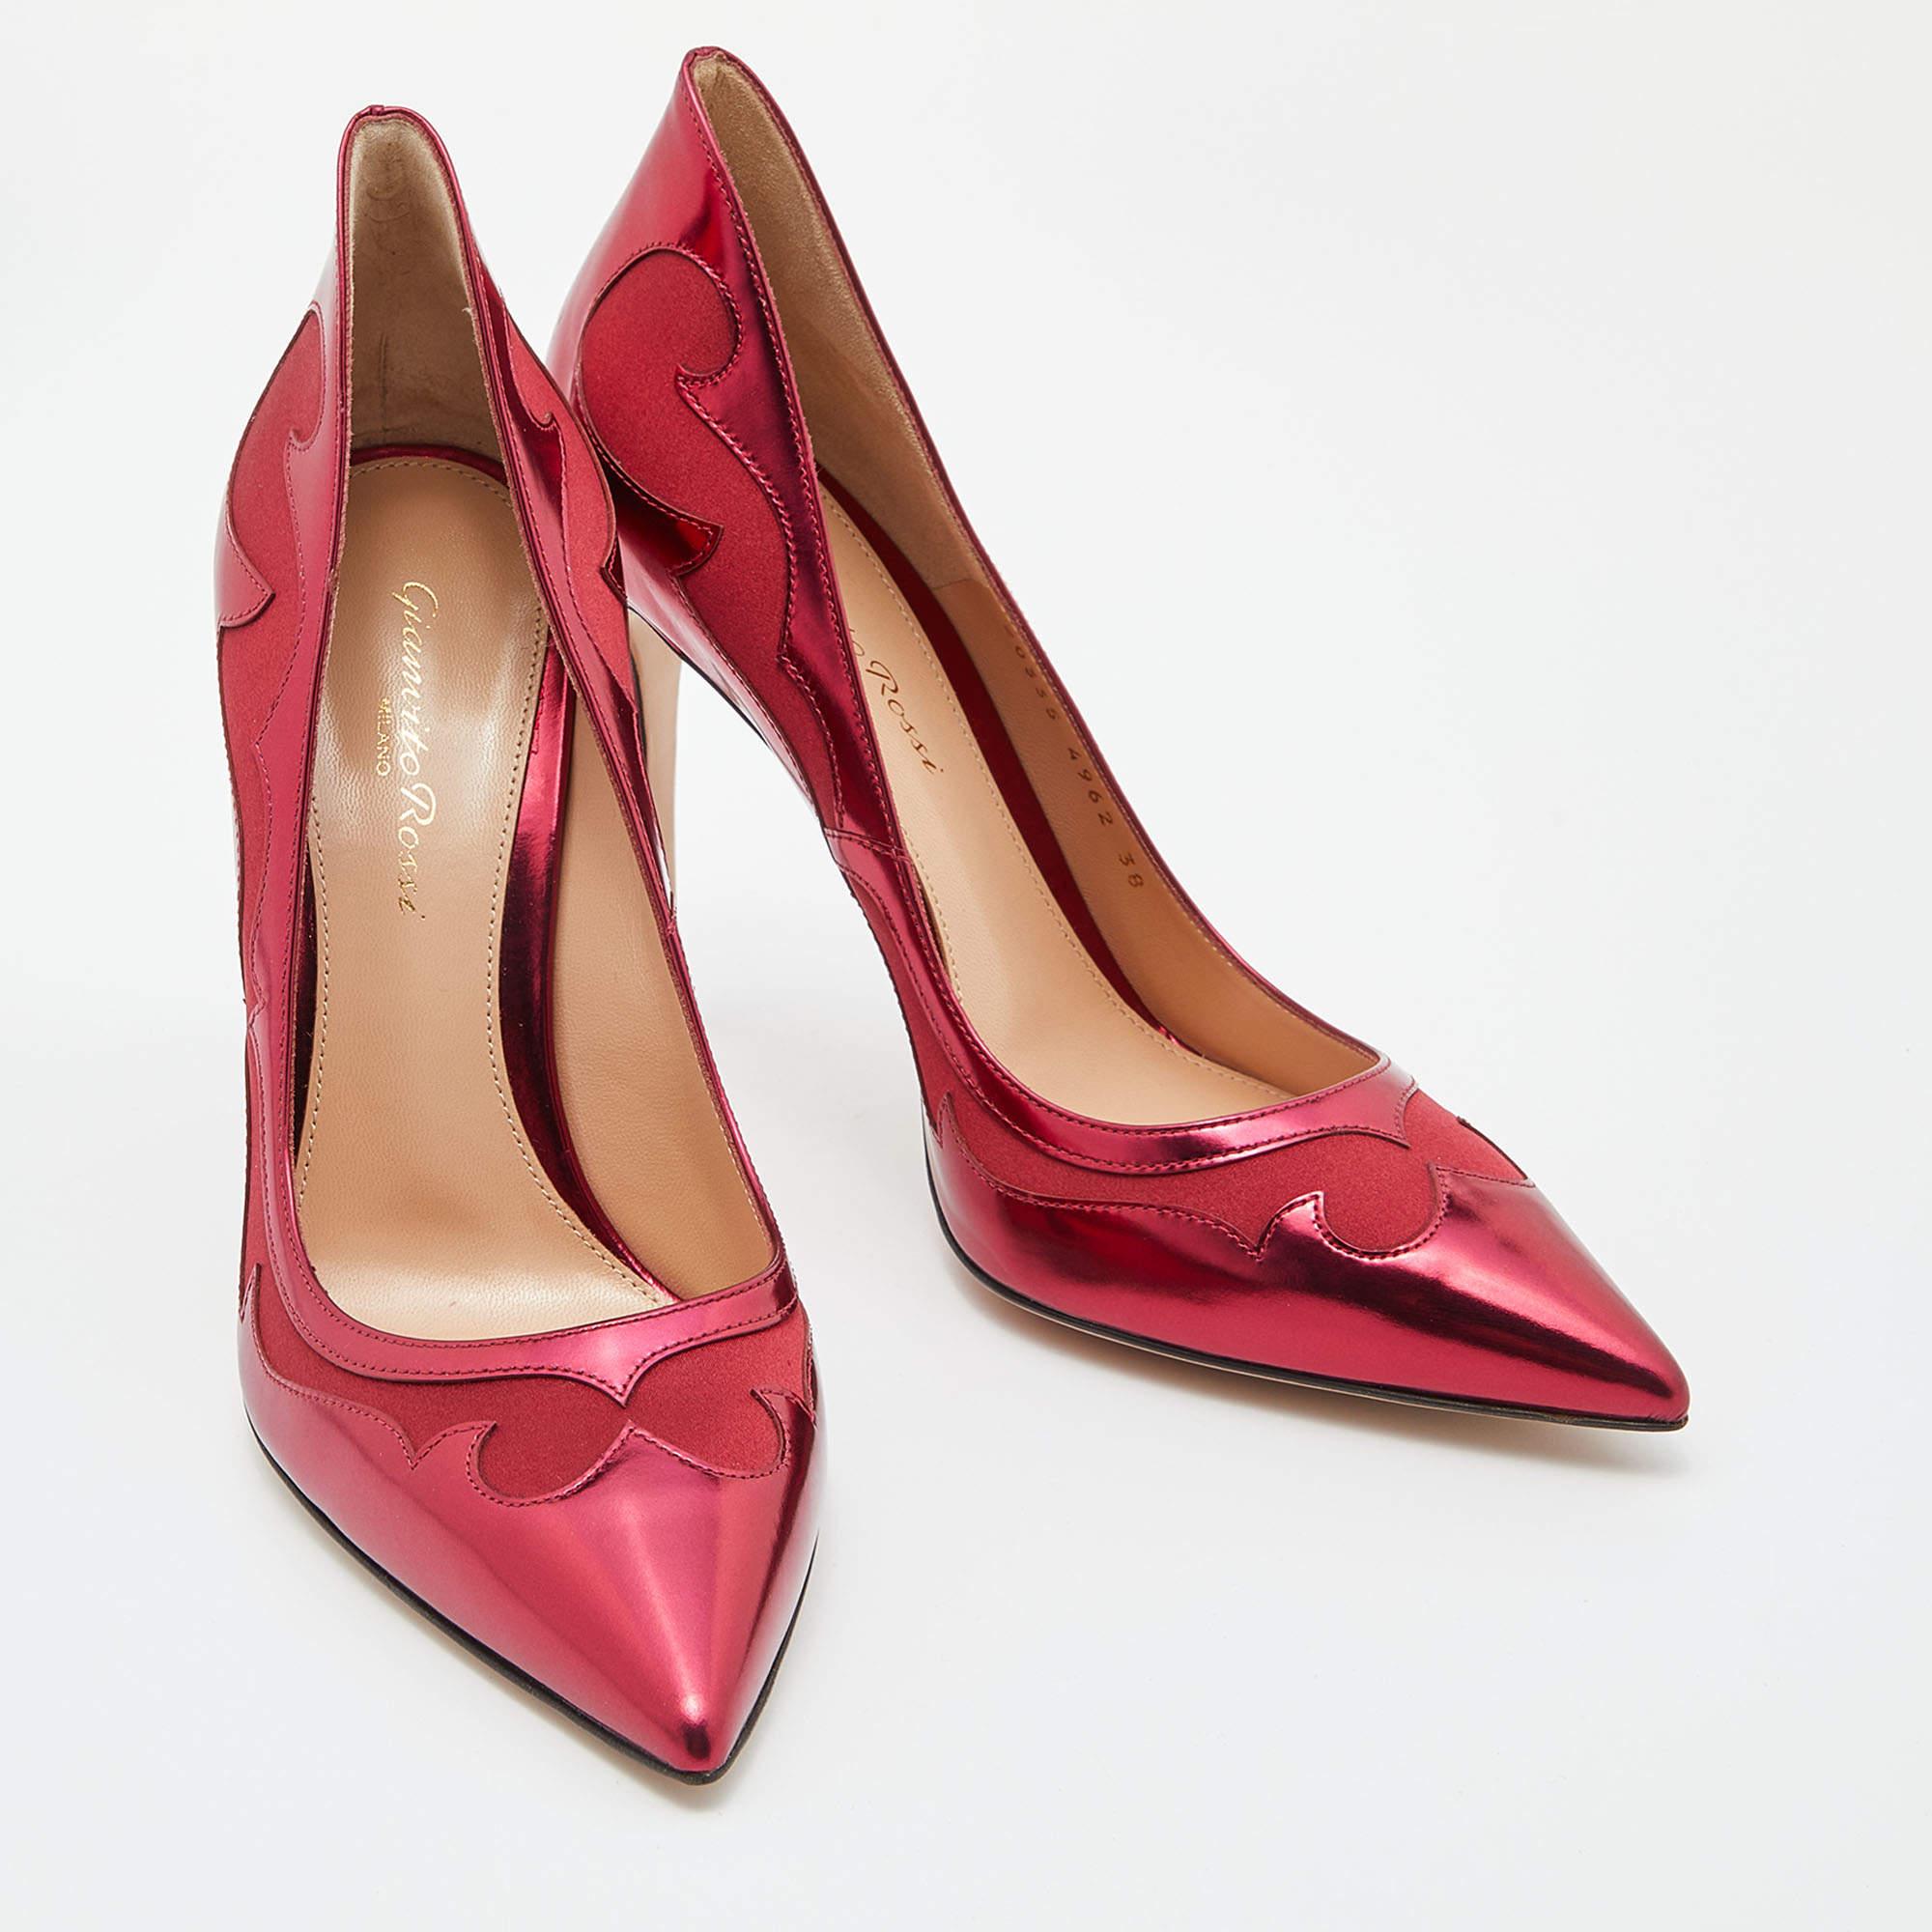 Women's Gianvito Rossi Burgundy Laser Cut Leather and Satin Pointed Toe Pumps Size 38